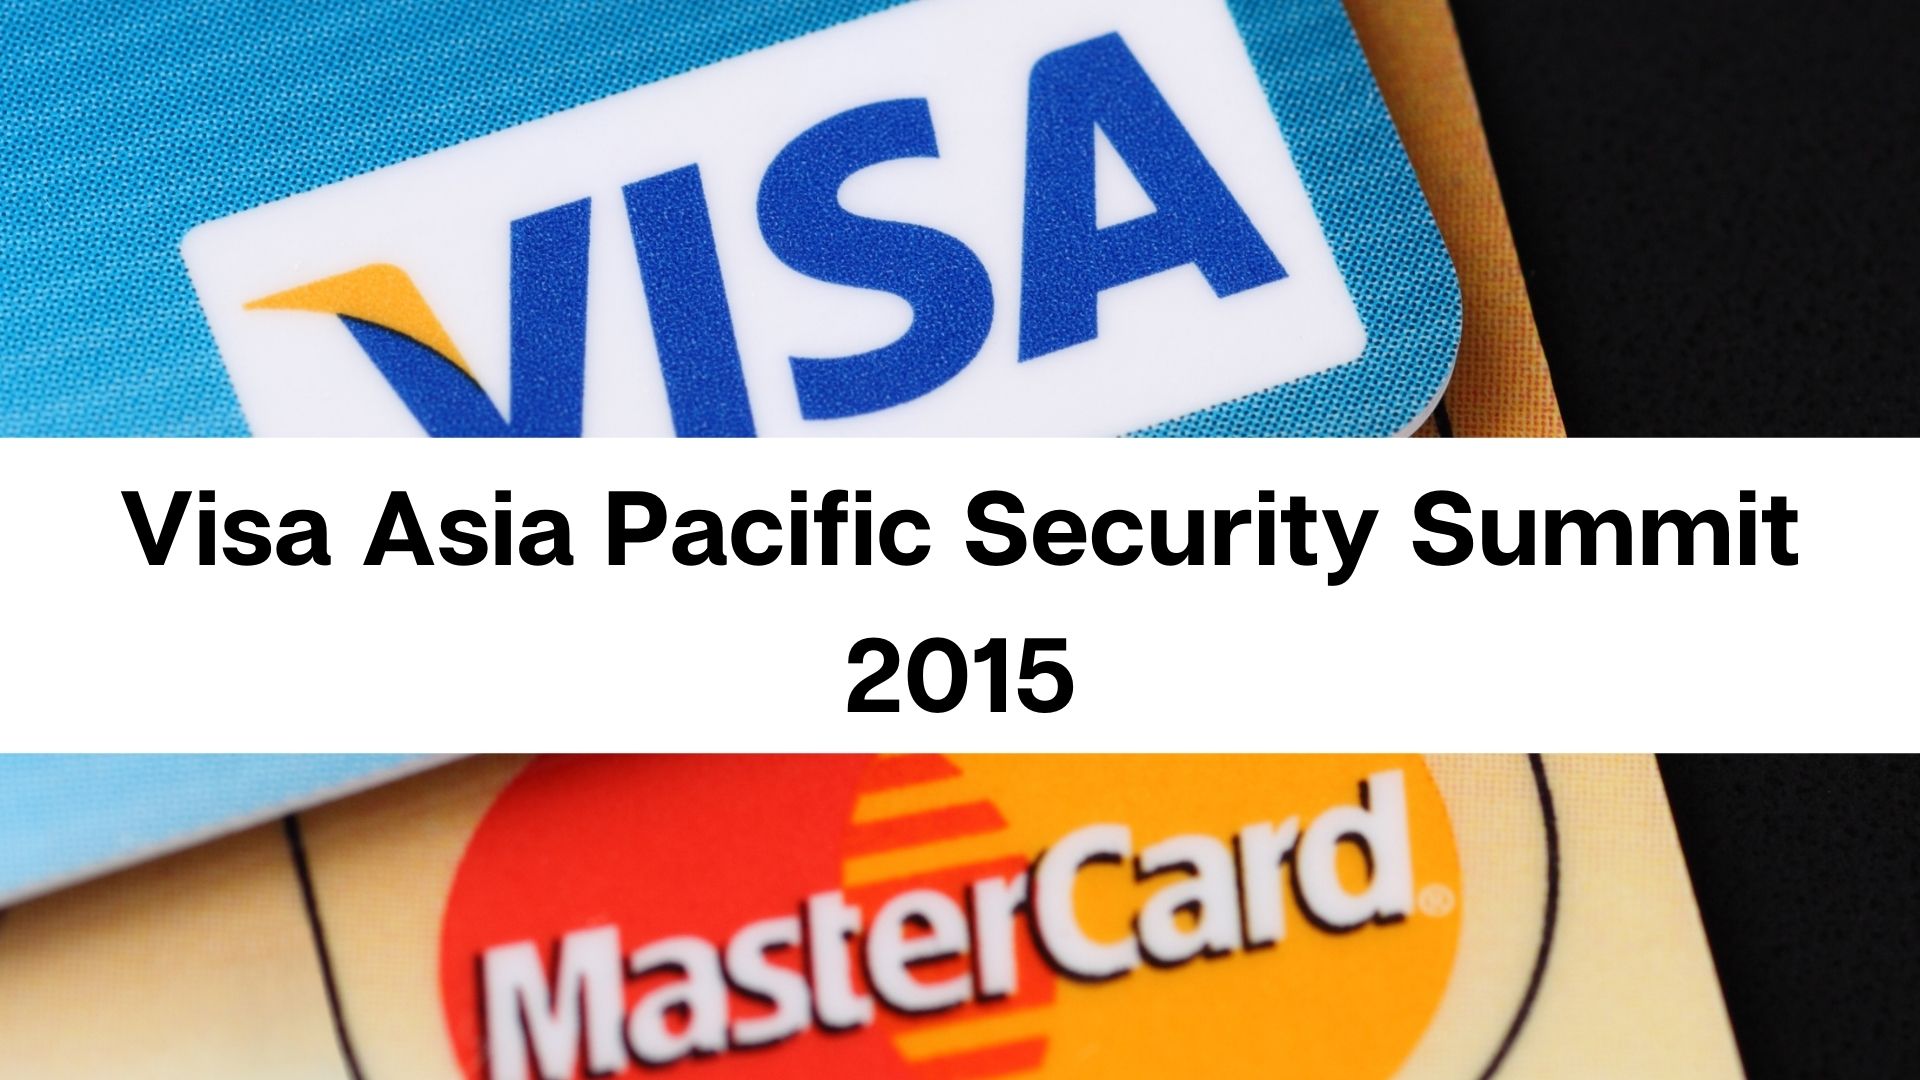 https://www.groundlabs.com/wp-content/uploads/2015/06/Visa-Asia-Pacific-Security-Summit-2015.jpg